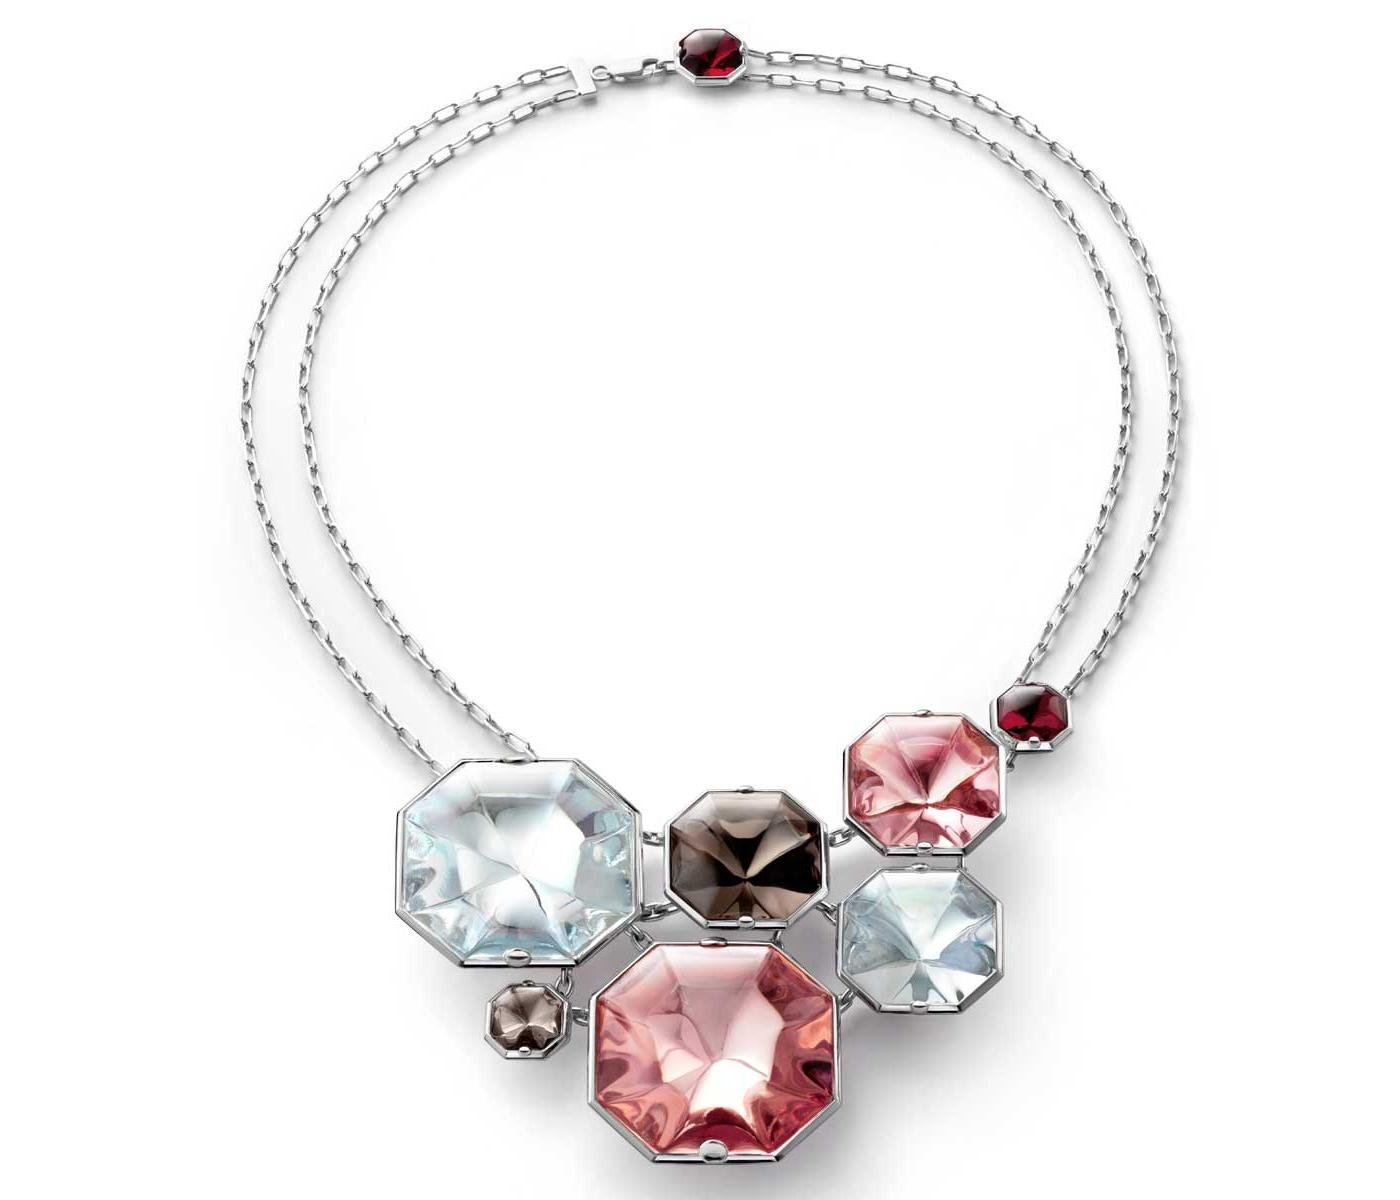 Necklace by Baccarat